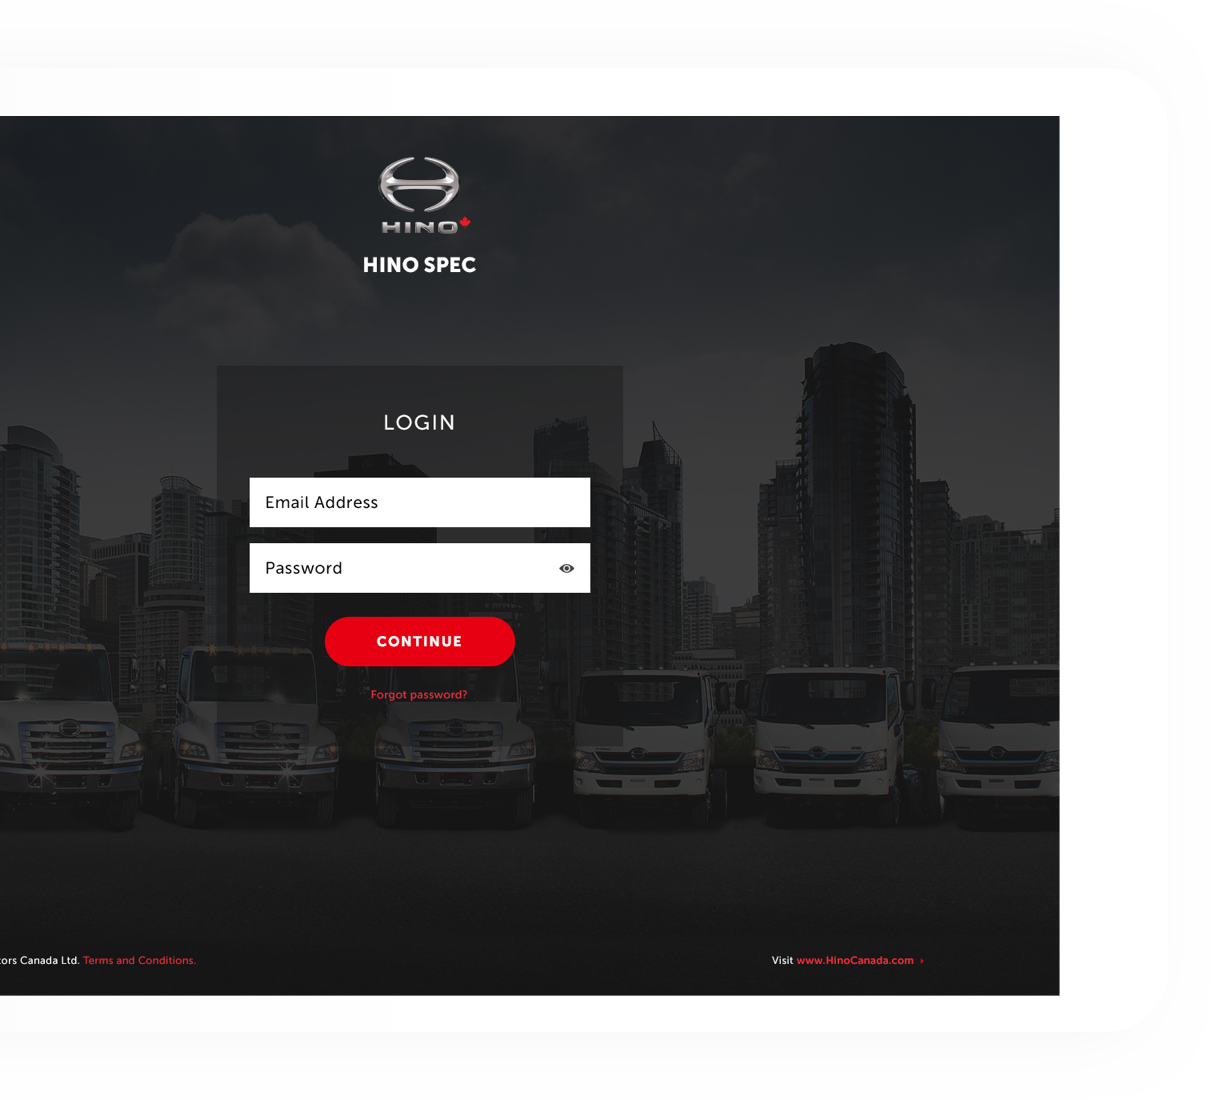 Hino Motors website loaded on the desktop to show the login page